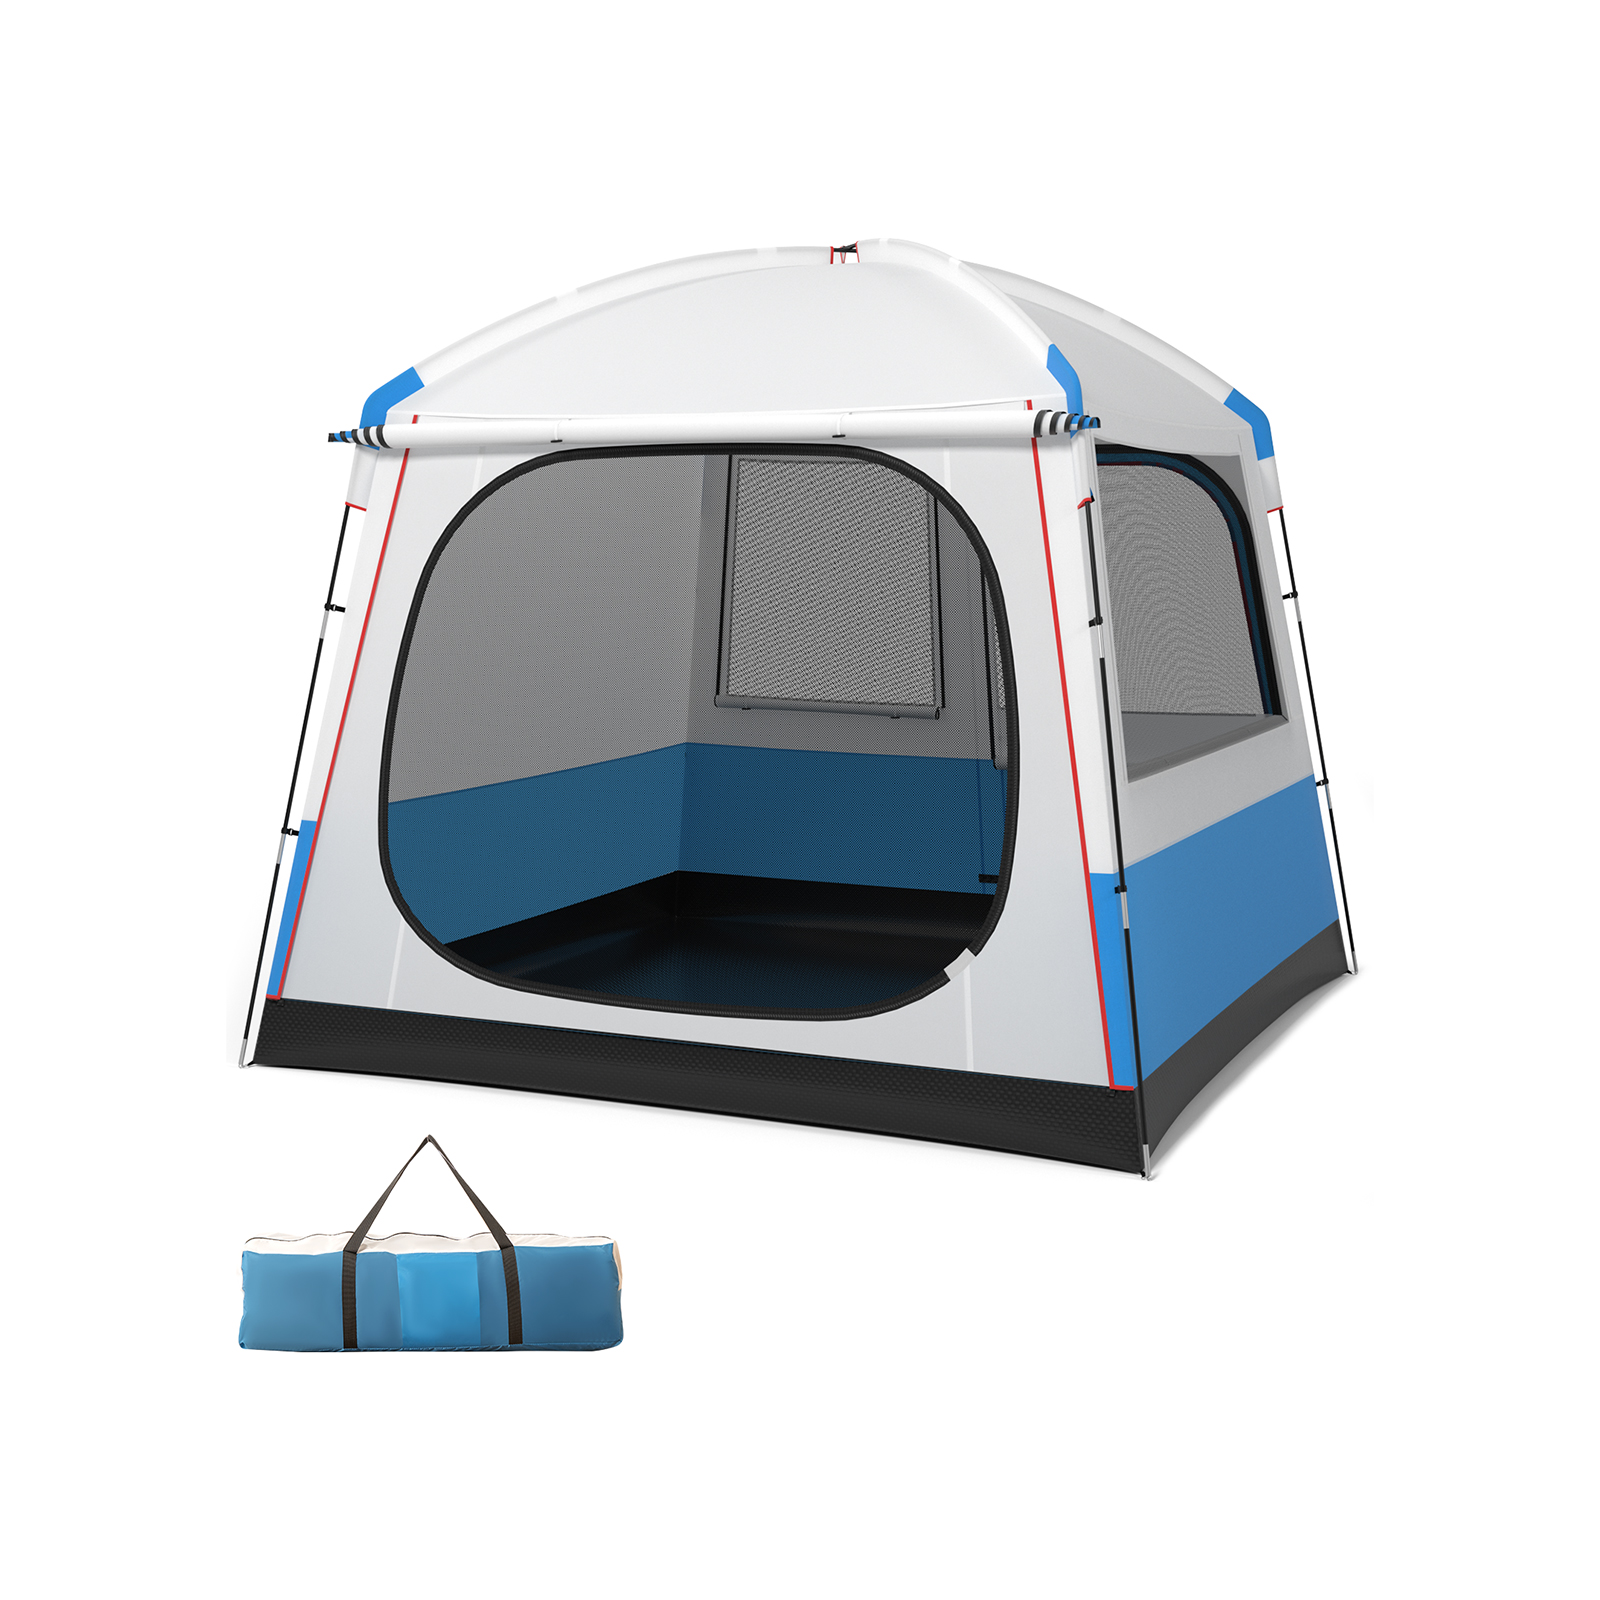 5-Person Camping Tent with Mesh Door Windows and Carrying Bag-Blue & White